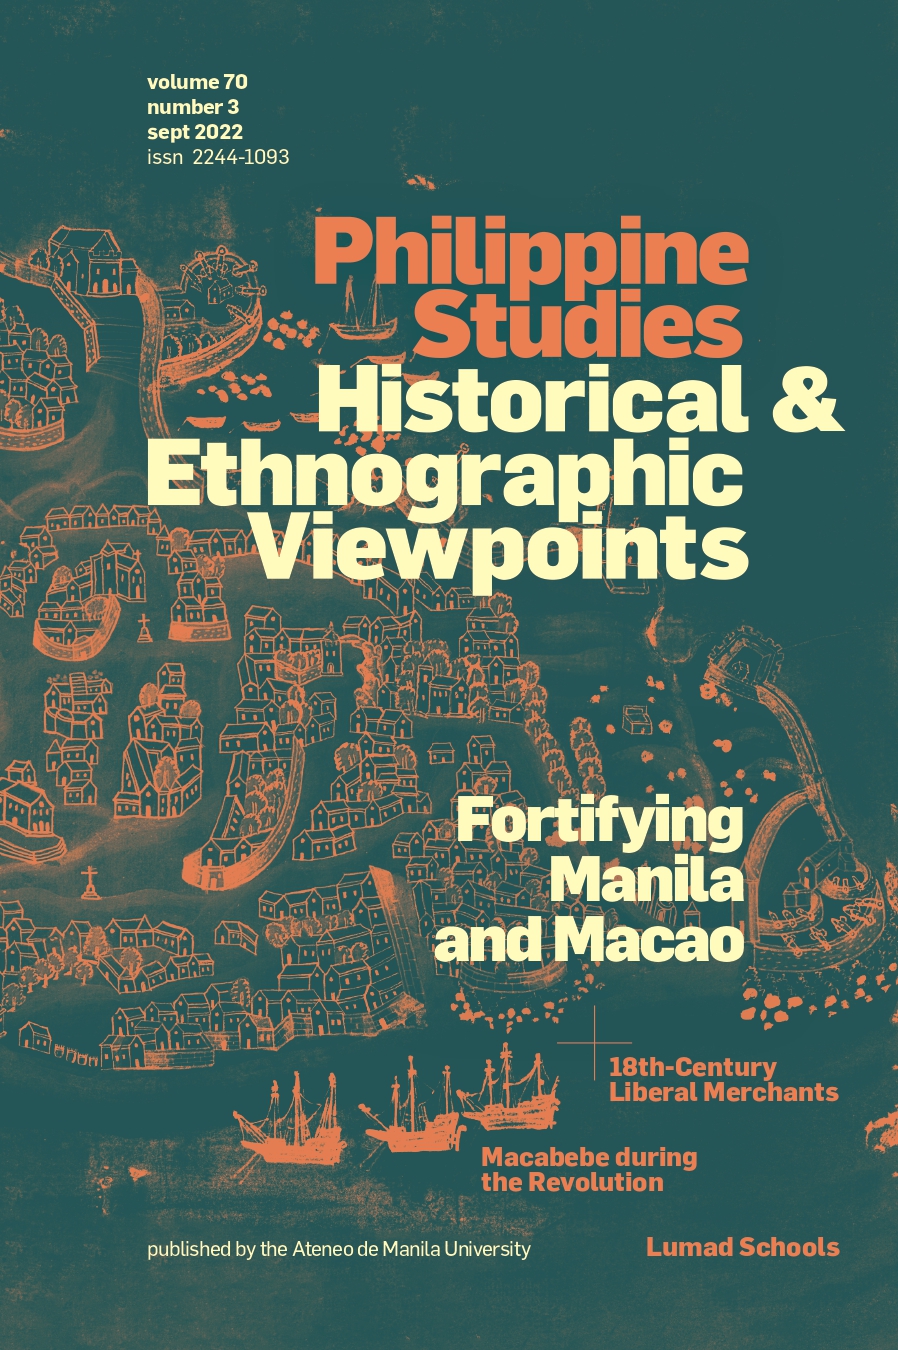 social studies research topics in the philippines